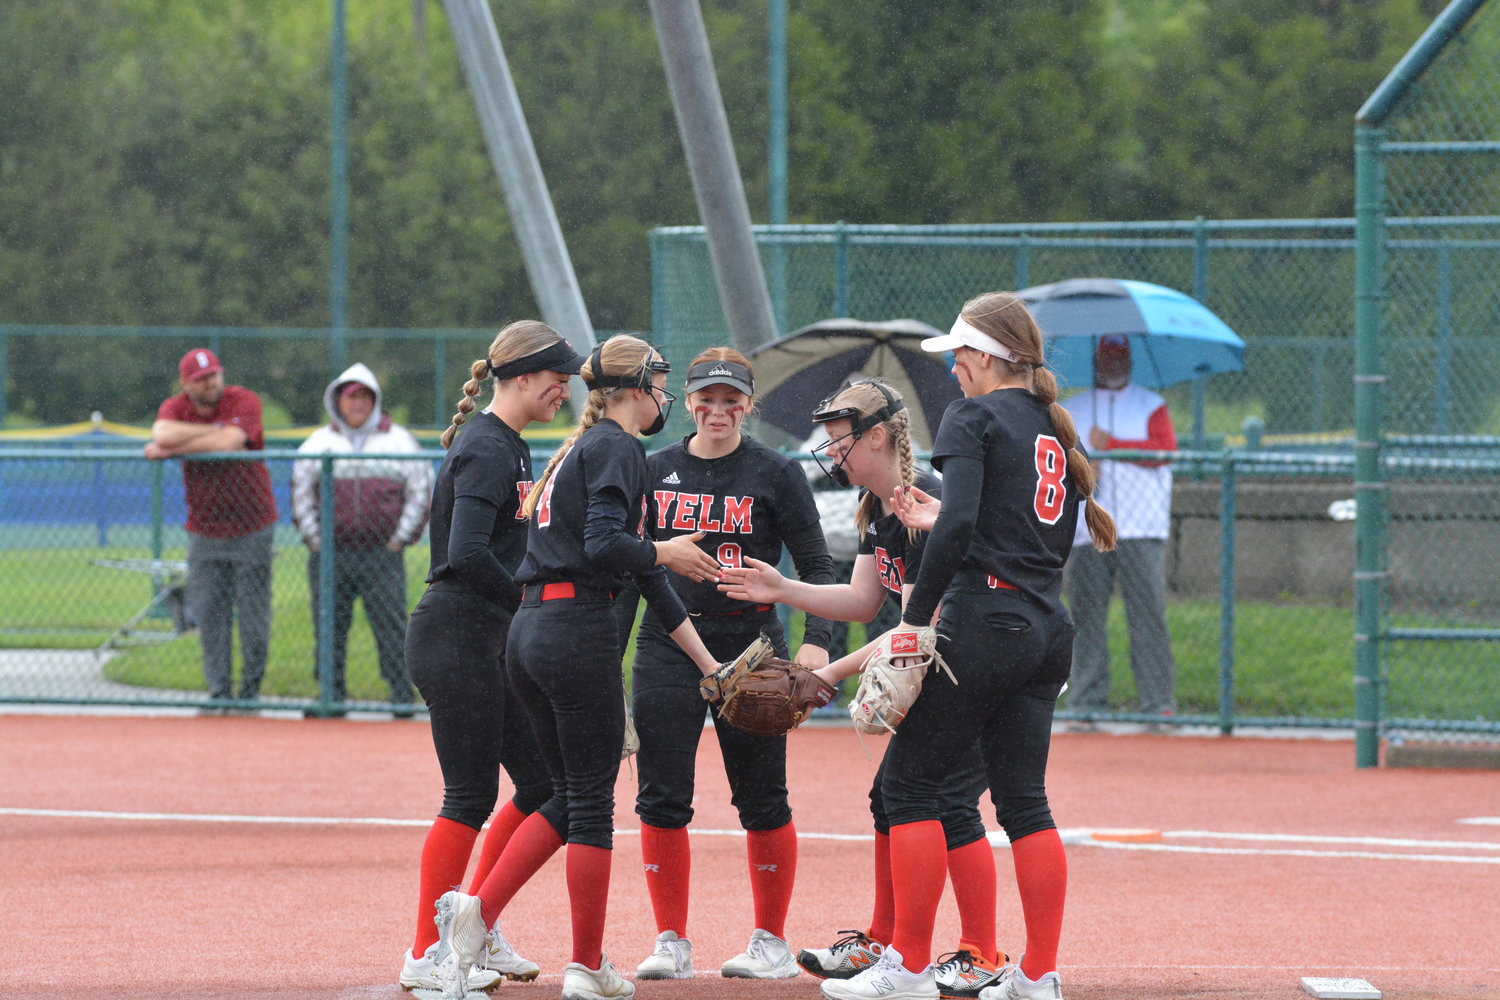 Freshman pitcher Jessika Jennings is greeted by the Tornados infield after retiring a batter against Cascade.